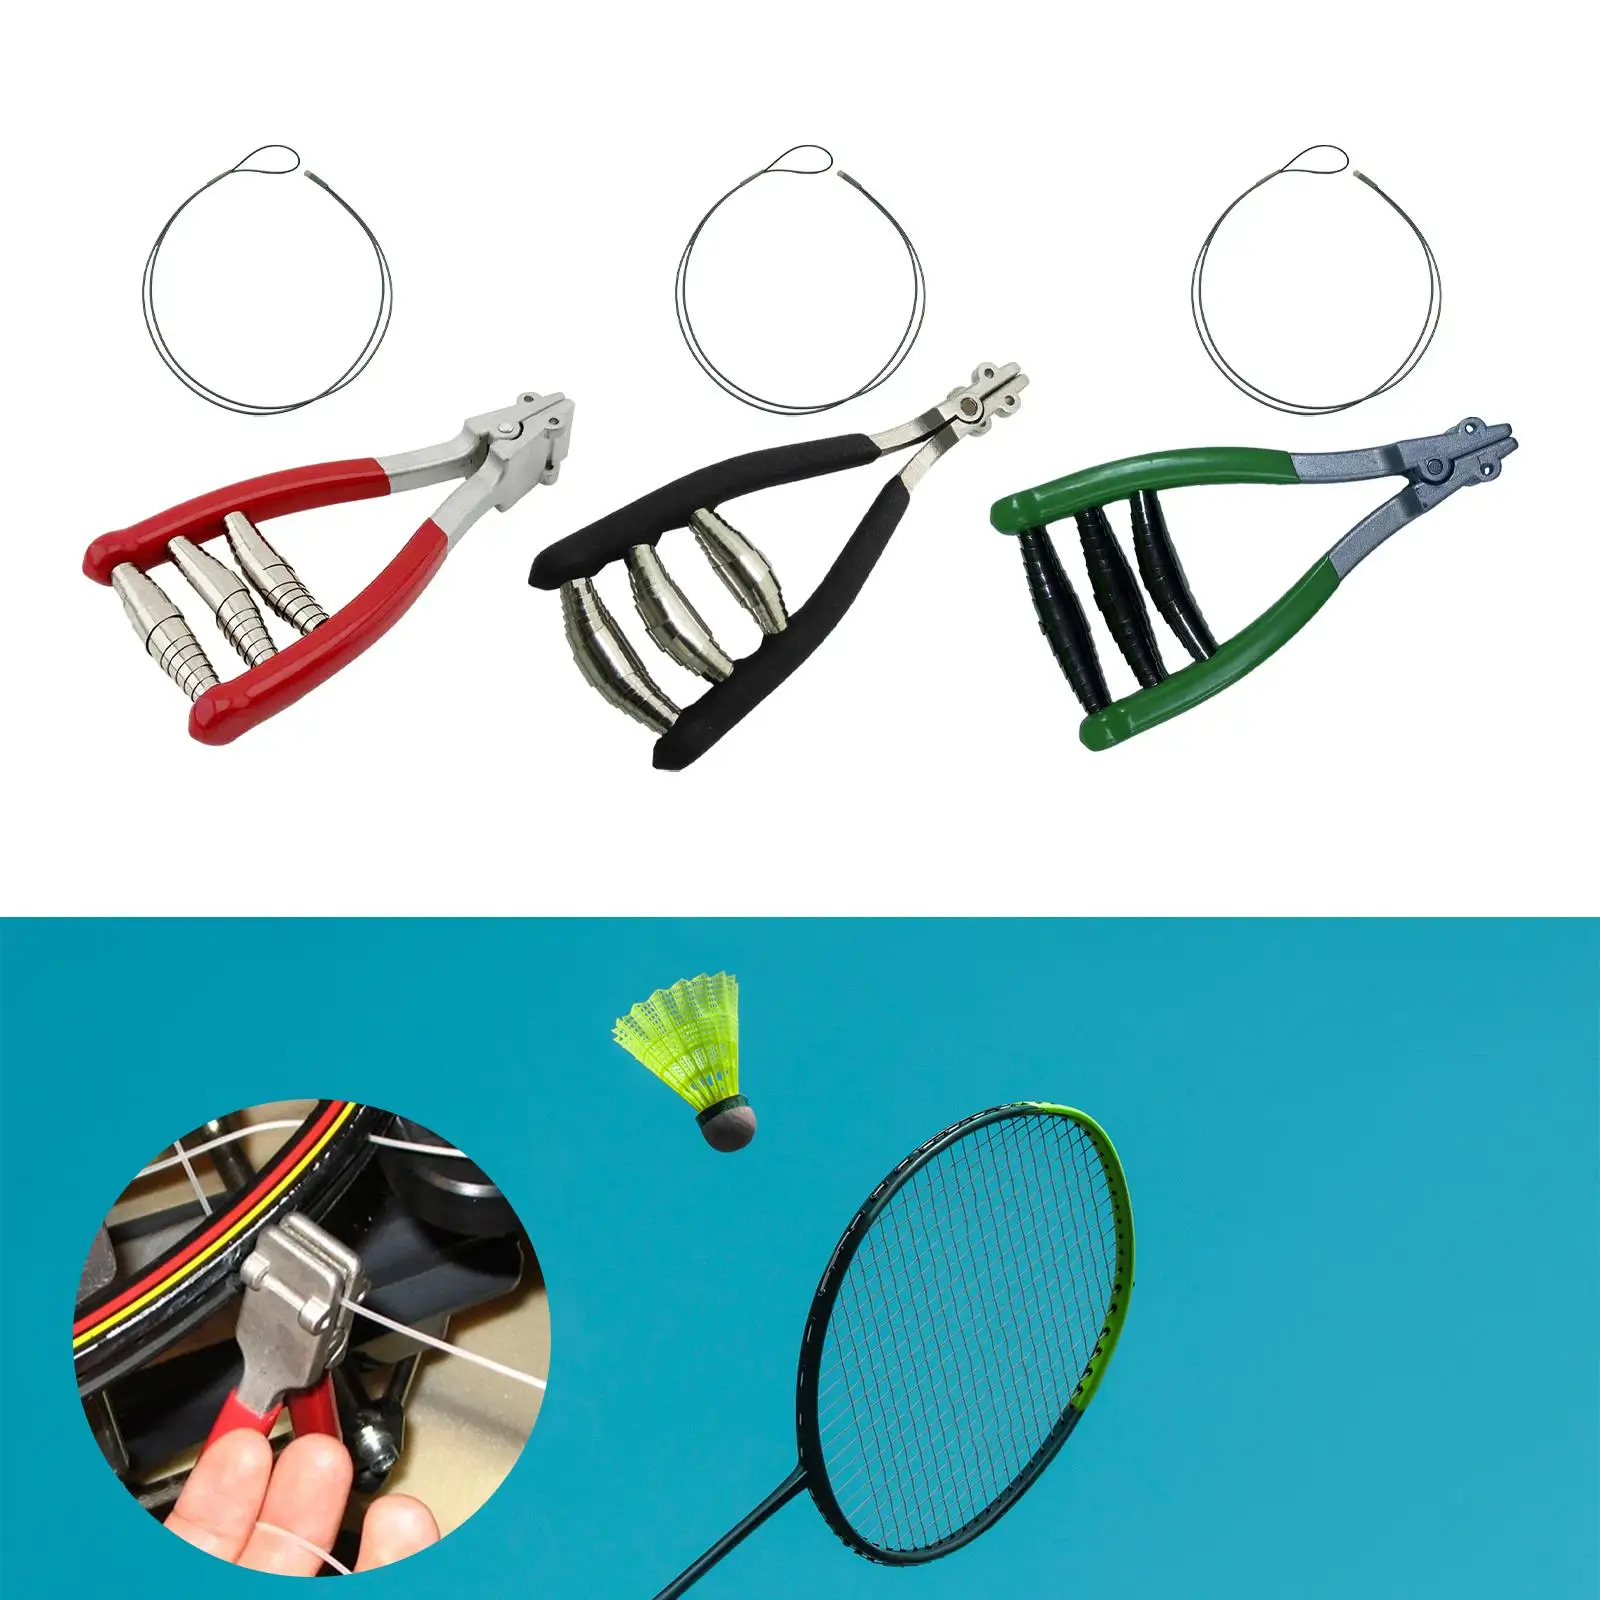 Sports Starting Clamp Badminton Starting Stringing Clamp Tennis Equipment Clamping Tool for Tennis Badminton Squash Accessories